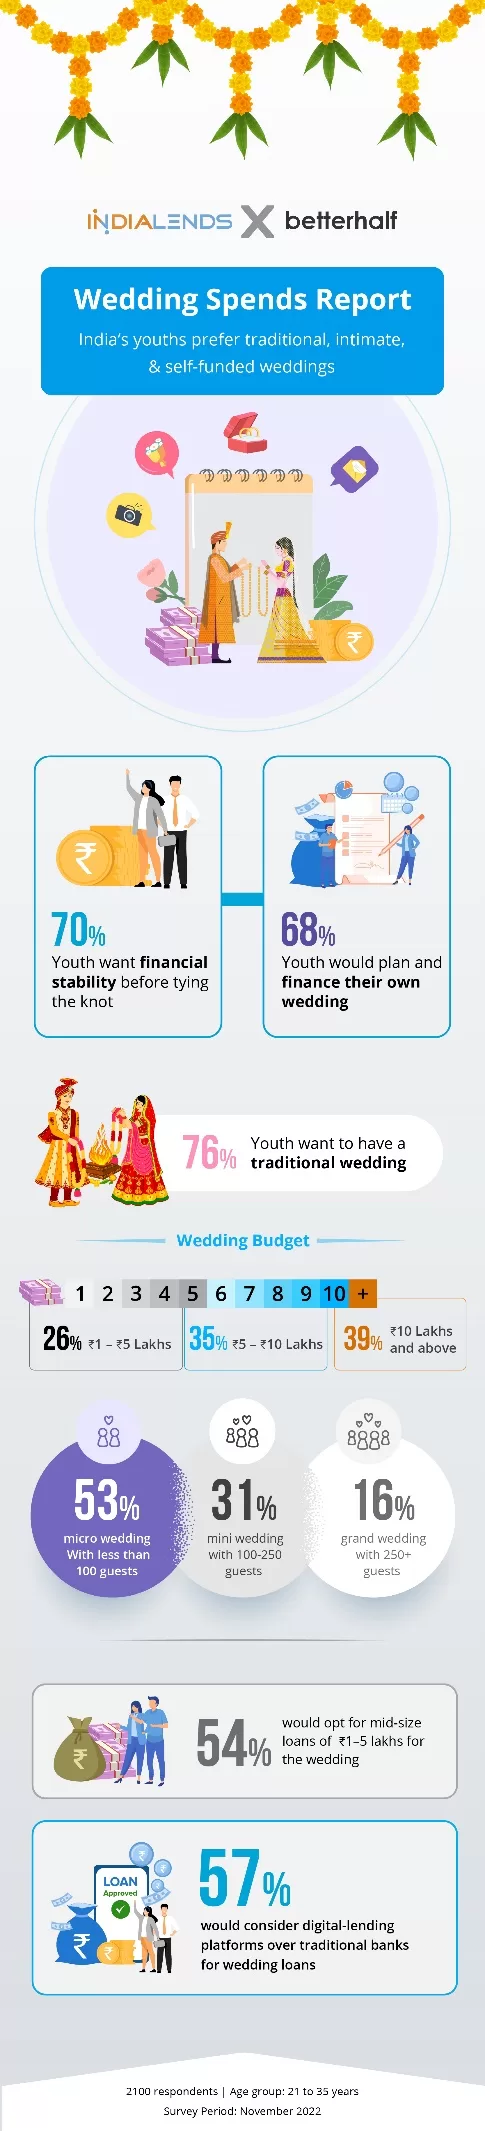 68% of youth want financial stability before tying the knot, says a new IndiaLends-Betterhalf survey